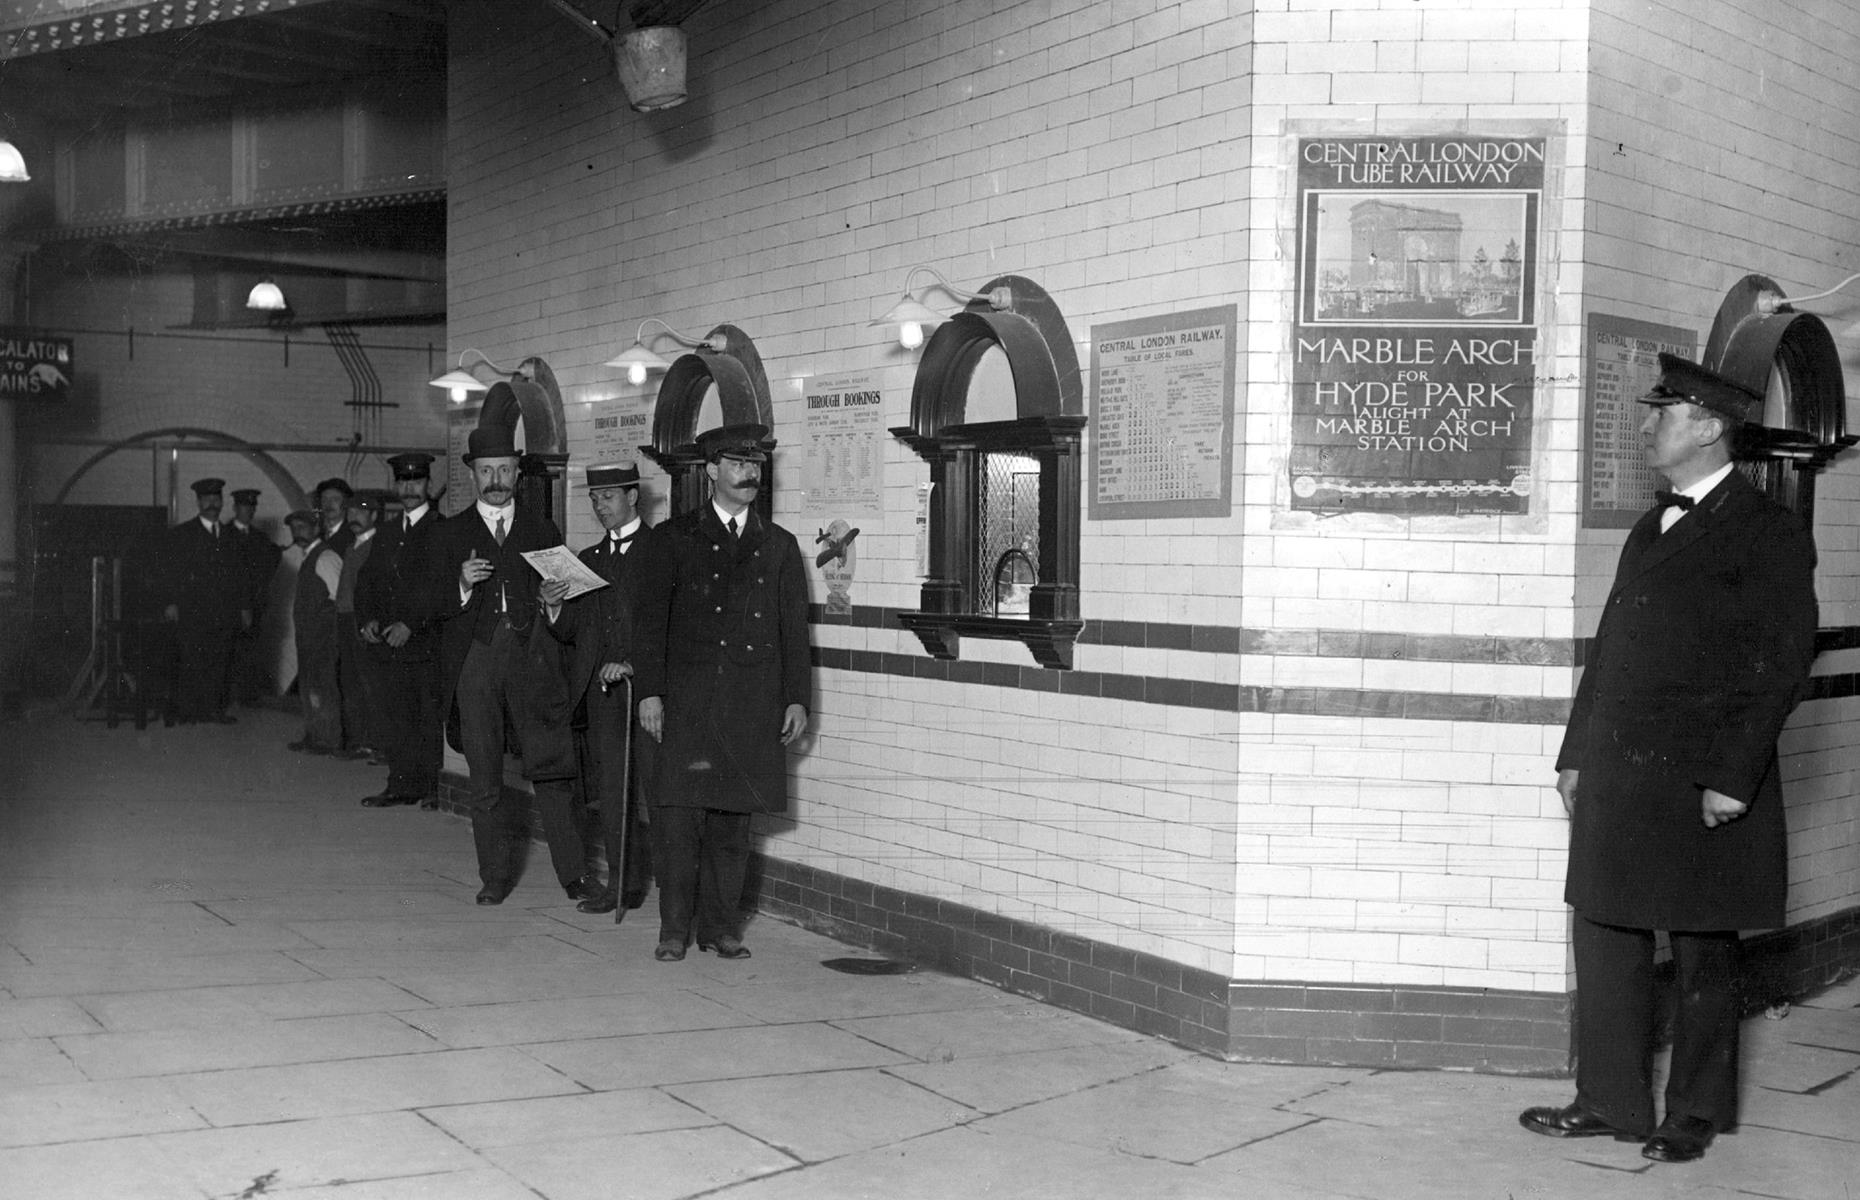 By 1908, the very first electric ticket machine had popped up on a London Underground station. However, the majority of stops still had manned booths, like this one snapped at Liverpool Street Station back in 1912. Spot the "Central London Tube Railway" poster promising a quick jaunt from Liverpool Street to Marble Arch and Hyde Park.